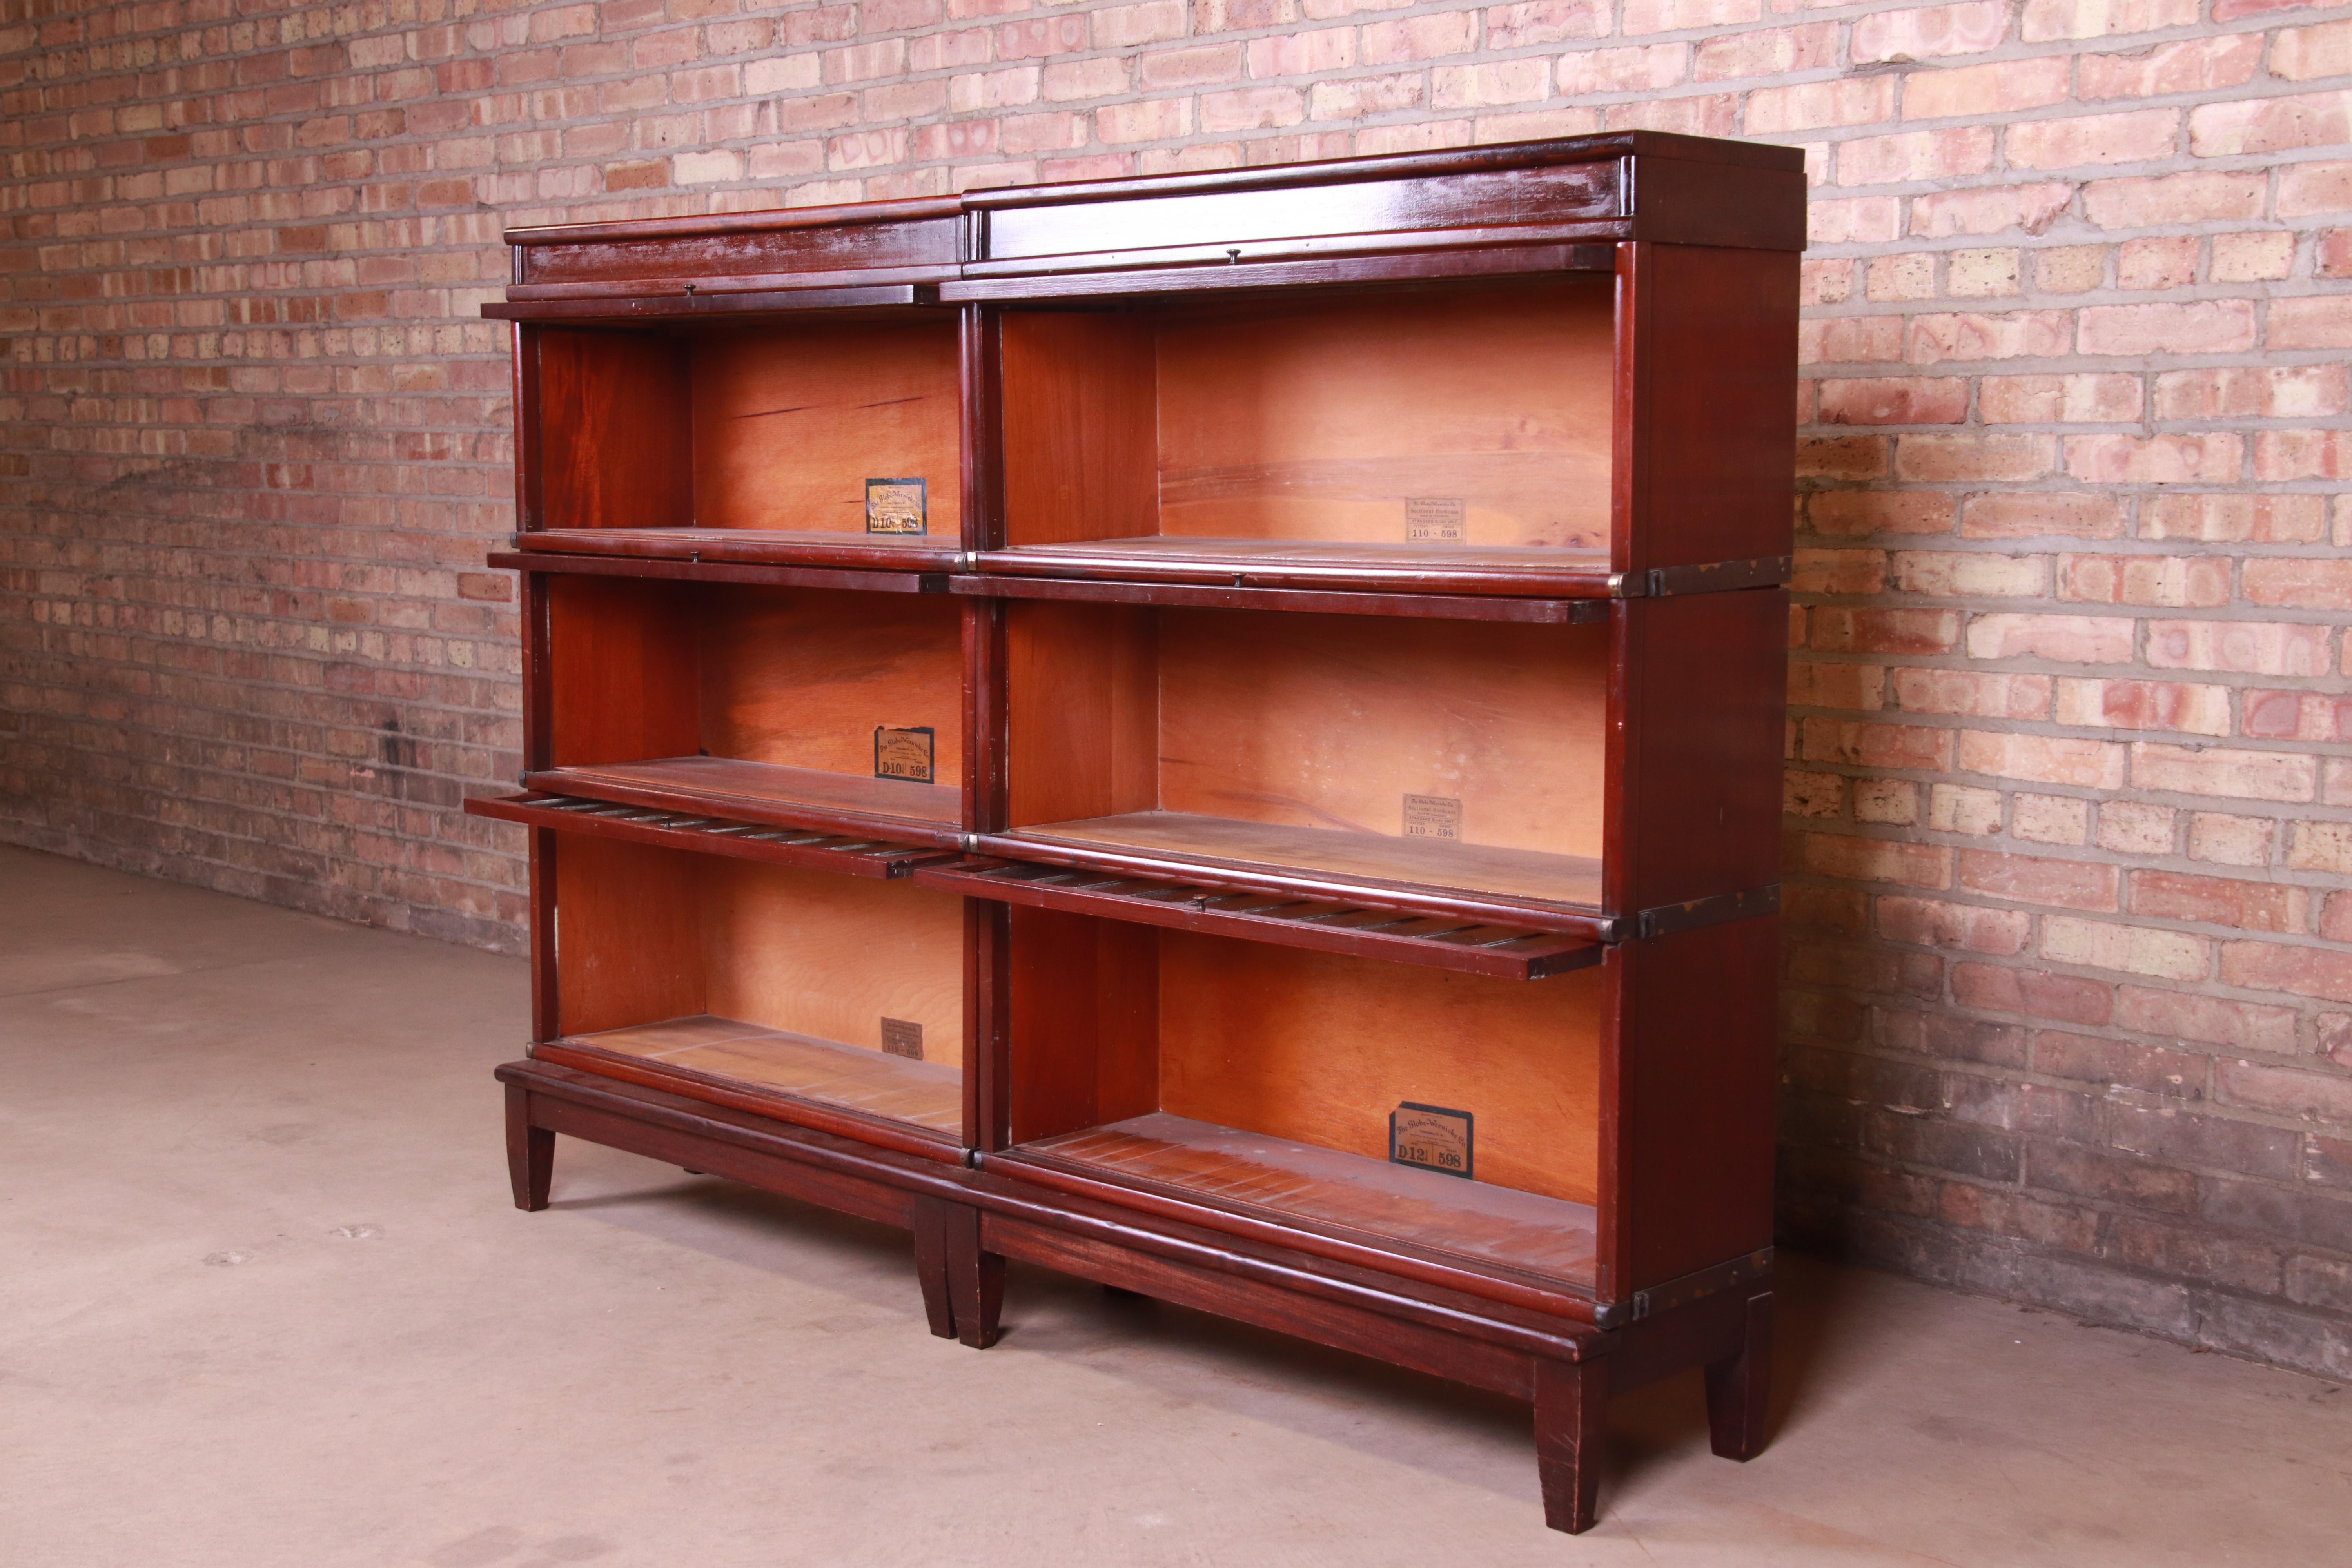 20th Century Globe Wernicke Mahogany Double Barrister Bookcase with Leaded Glass Doors, 1920s